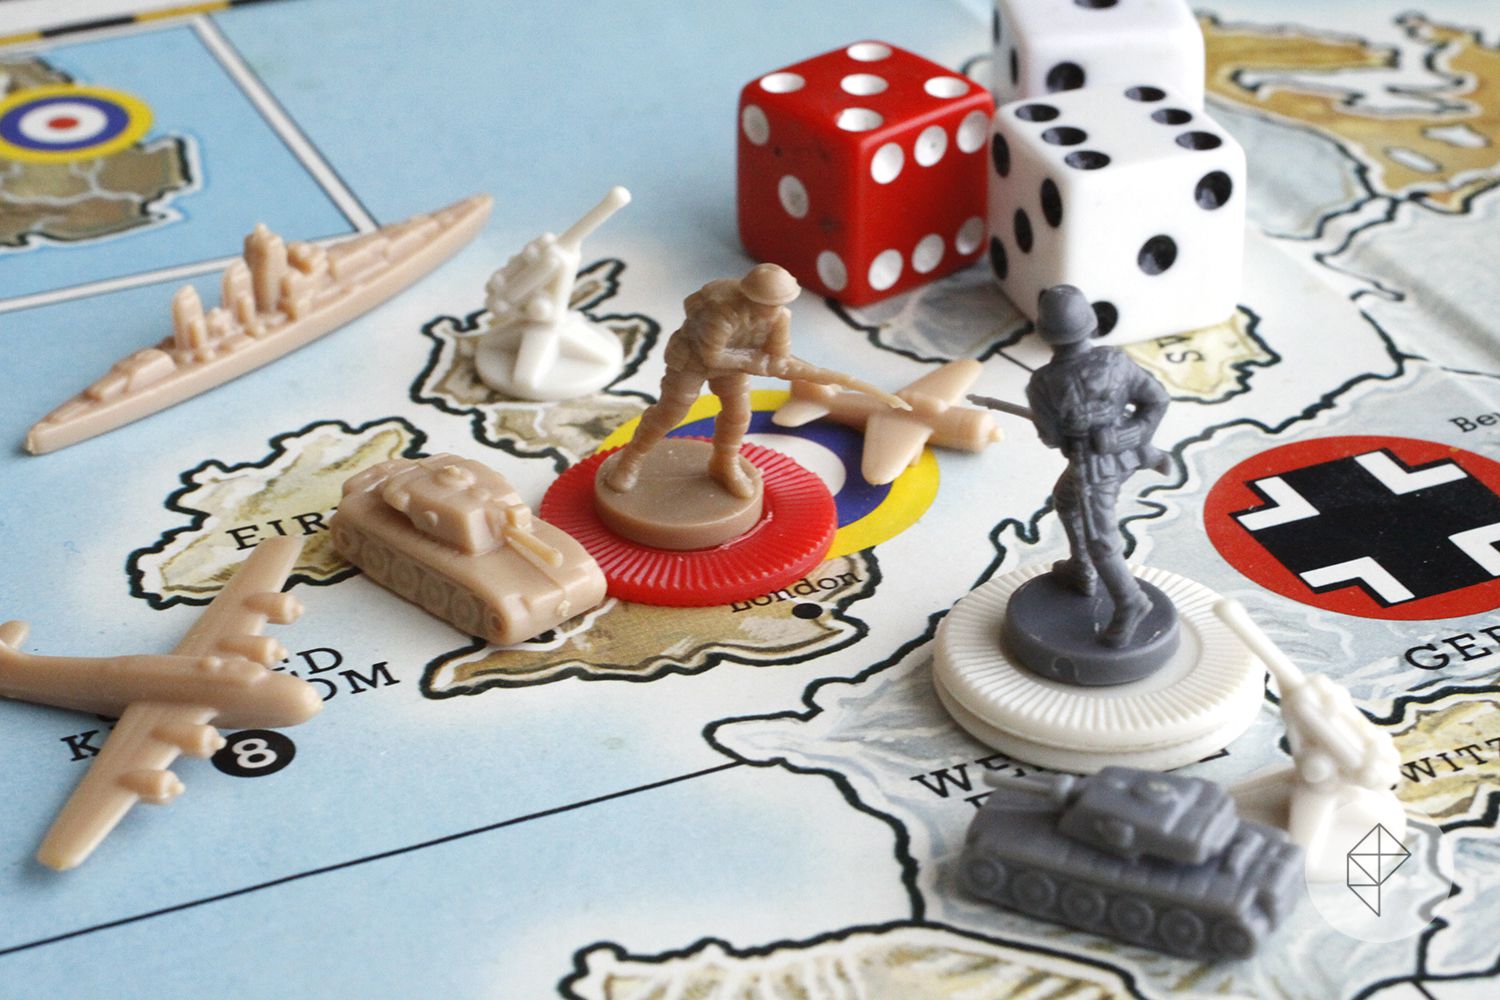 Photo of Axis &amp; Allies board showing infantry, air, and sea units across the English Channel. There are dice in the background as well.